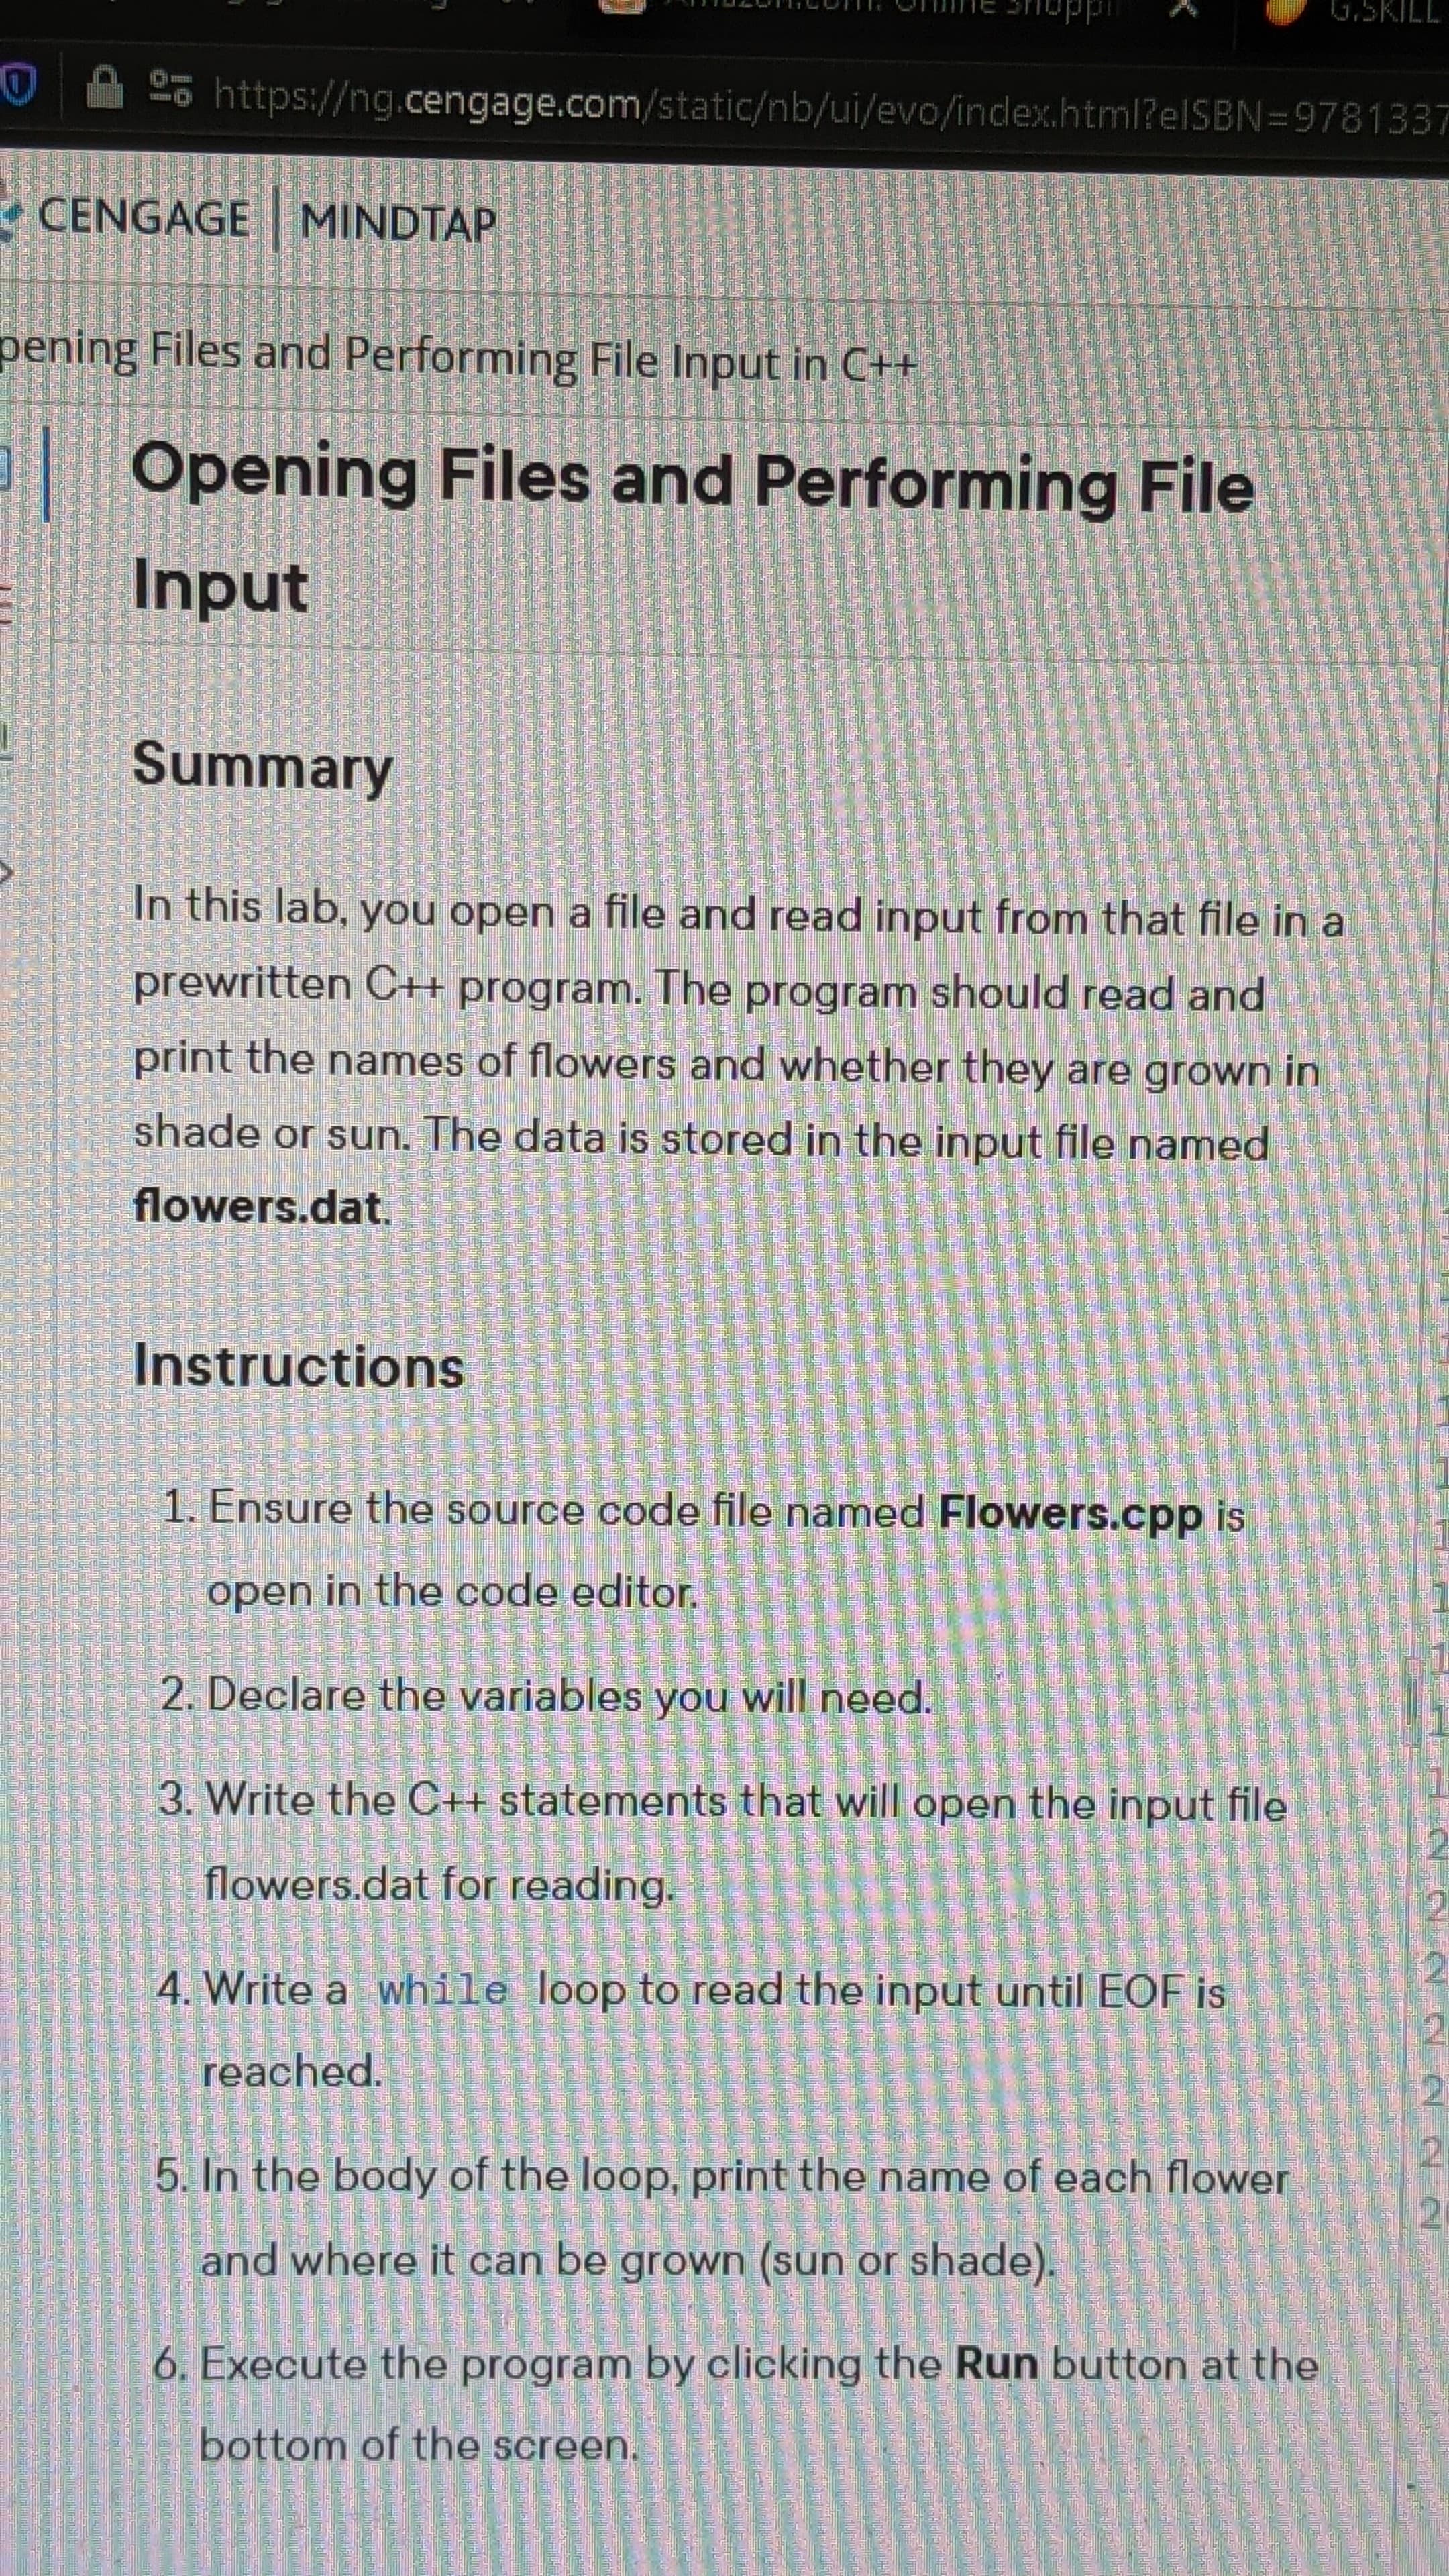 In this lab, you open a file and read input from that file in a
prewritten C++ program. The program should read and
print the names of flowers and whether they are grown in
shade or sun. The data is stored in the input file named
flowers.dat.
